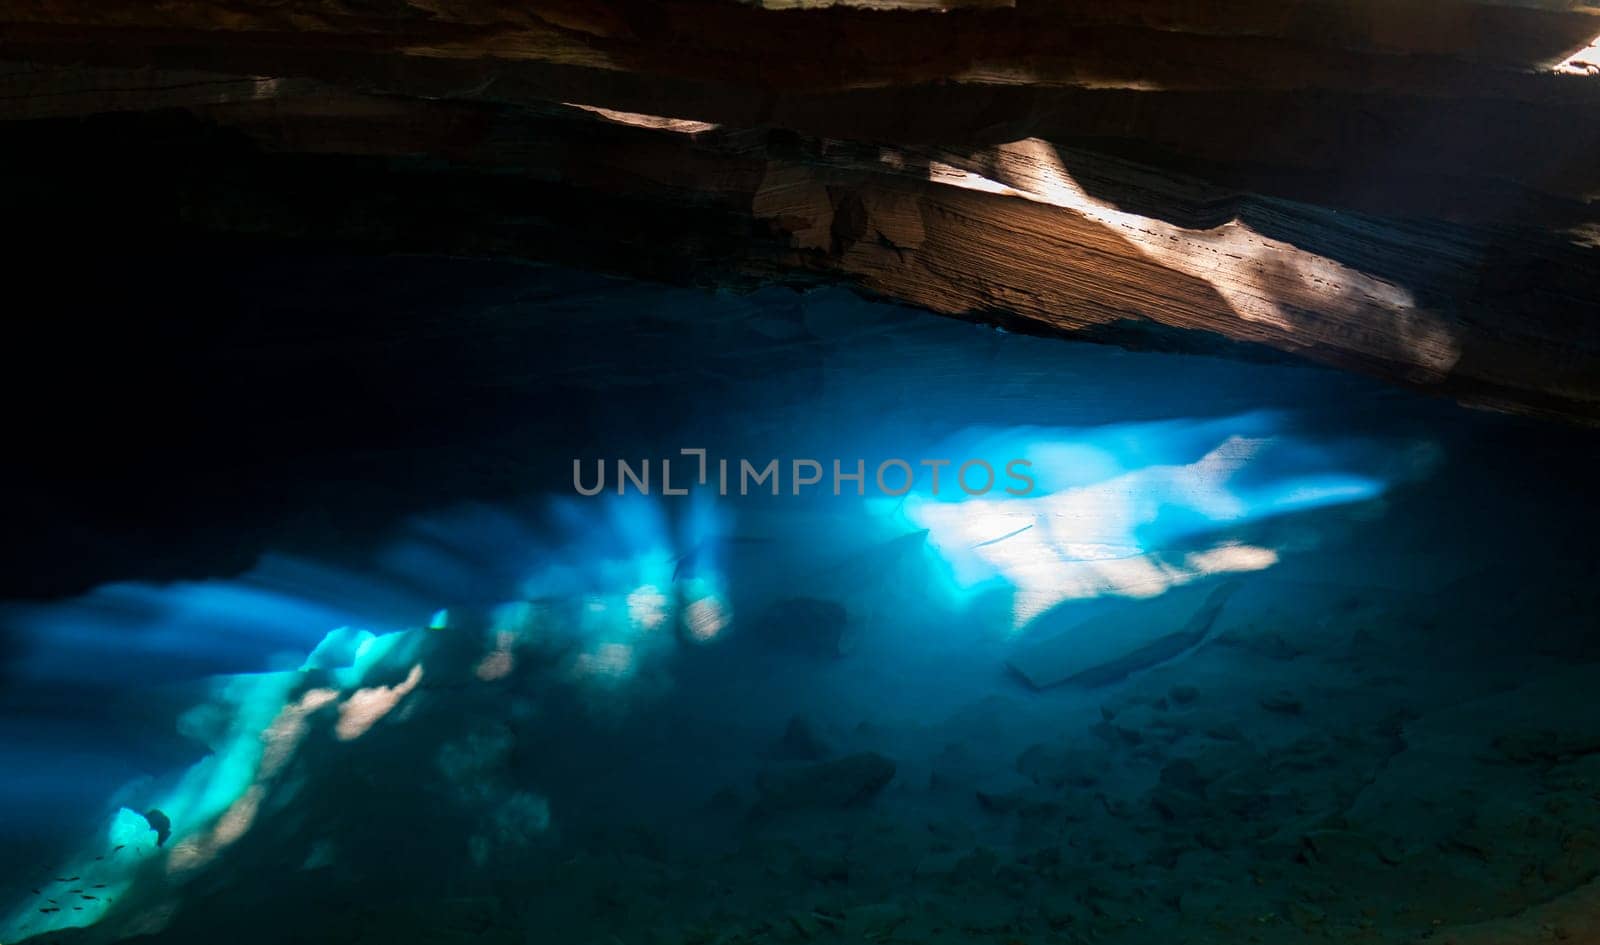 Sunlight streams through a cave, lighting up the blue waters beneath.